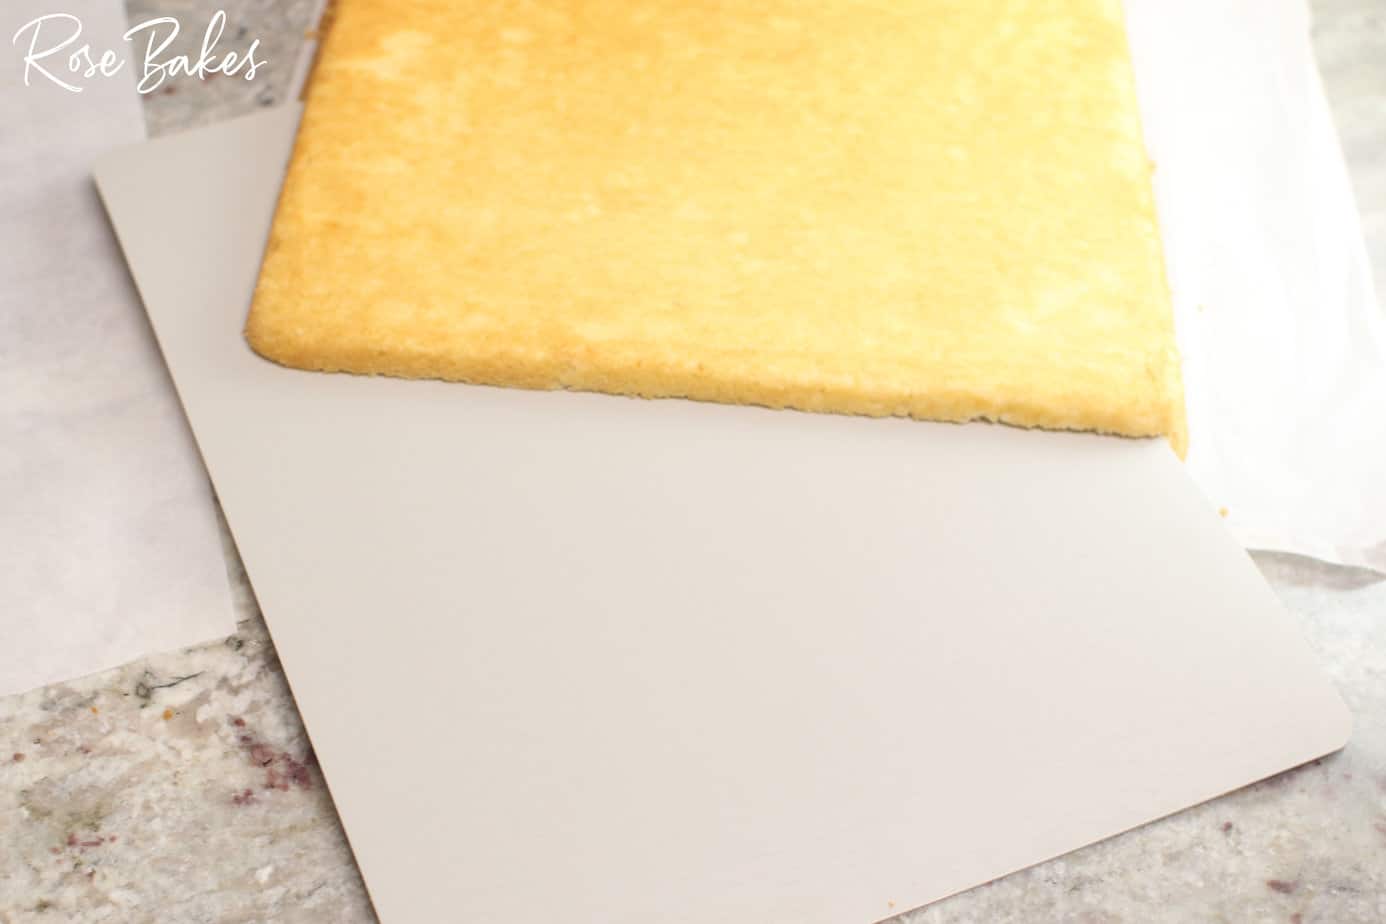 separating the cake layers with a thin board to lift the top layer off.